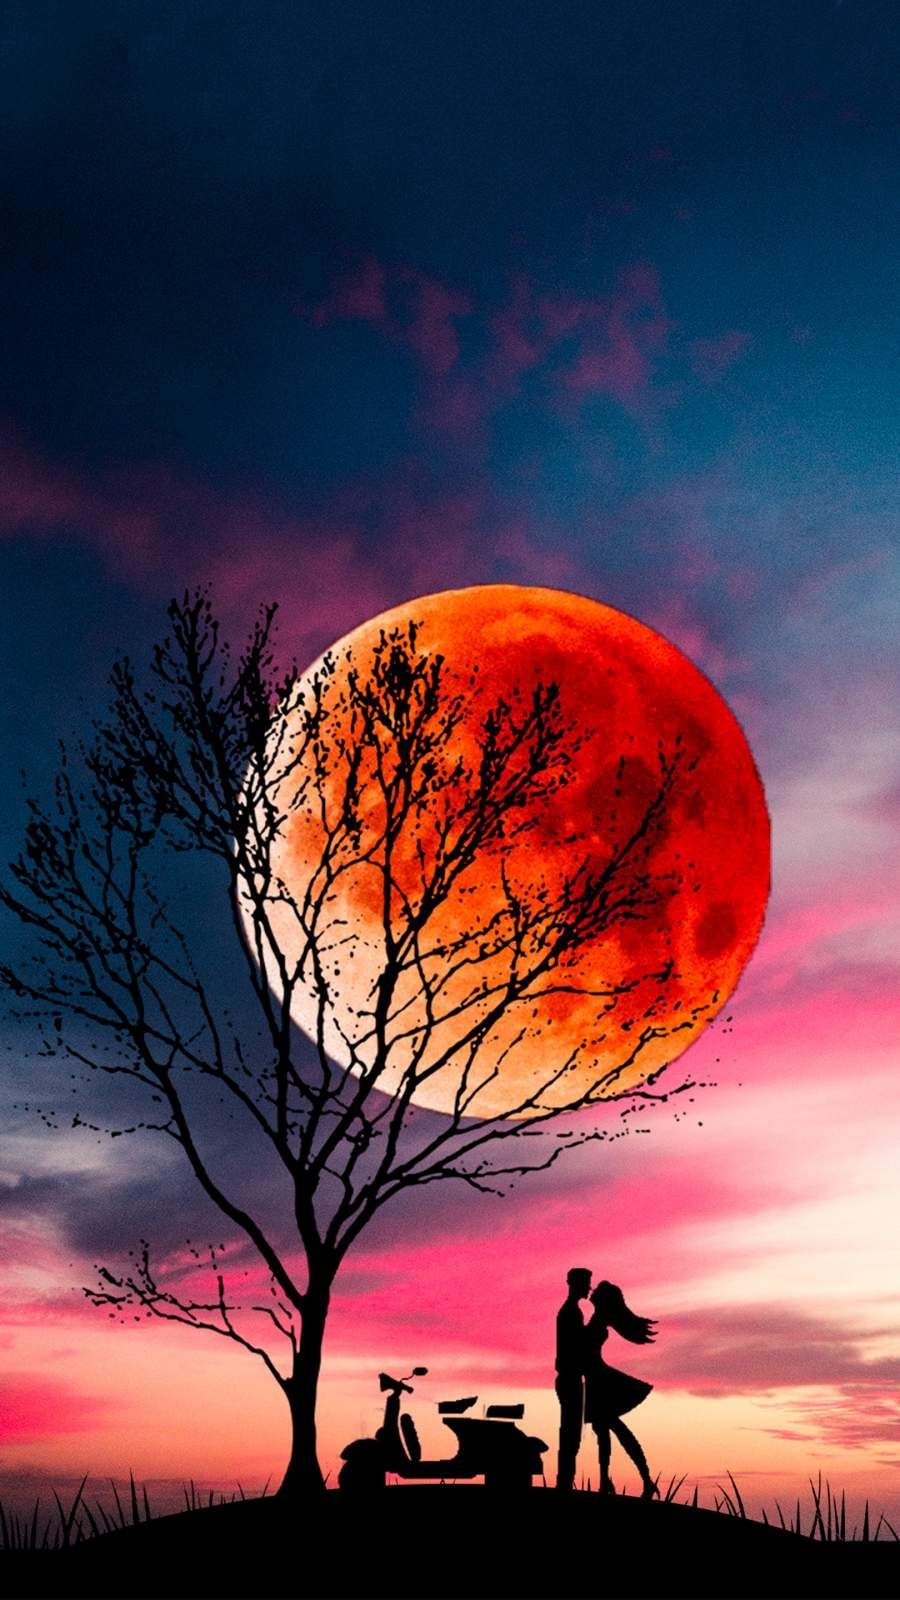 Sunset Moon Lovers iPhone Wallpaper. iPhone wallpaper, Beautiful nature wallpaper, Love wallpaper